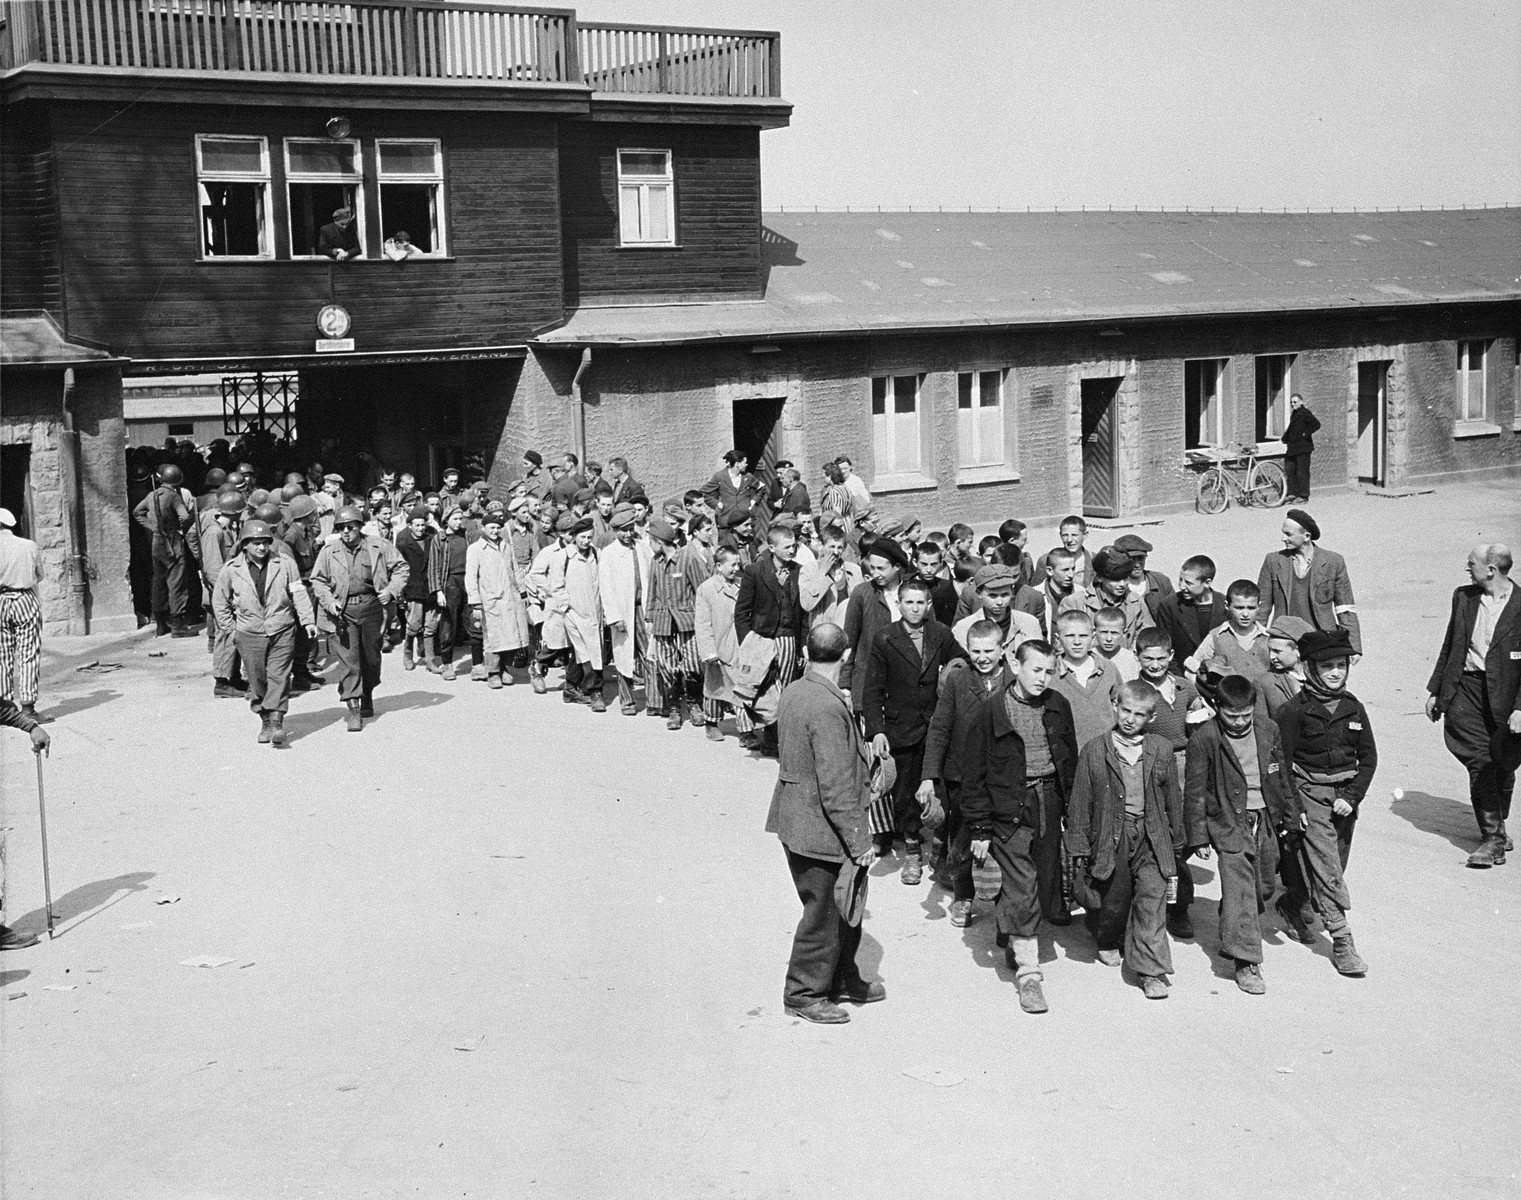 Escorted by American soldiers, a transport of child survivors of Buchenwald file out of the main gate of the camp.

The original caption reads, "Internees at the Buchenwald Concentration Camp near Weimar Germany march from the camp to receive treatment at an American hospital after the camp was captured by U.S. Third Army troops."

The boys are accompanied by American soldiers and directed by elements of the camp underground who watd over them, including Polish Jews Yakov Werber and Eli Grinbaum (on the right). 

Among the children pictured are Izio Rosenman (head of column), Jacques Finkel, Charles Finkel, Fredek Margolis, Lalek Russ, Salek Sandowski, George Goldbloom and ? Zylber.  Misho Frailich, Willi Fogel, A. Grossman, Lotci Miller, Laiza Grynberg, Usha Grynberg, David Perlmutter, Marek Lodzinsky, Yankel Kapelush, Yosel Dziubak, Loyosh Hershkovitz, ? Yakubovitz, Reuven Wekselman, Stanley Weinstein, Herschek Zeit, Henryk Kolber, Jacques Werber and Philip Kaner.  Mor Stern is the boy in the beret and white coat, with right arm hanging down straight just right of the two American soldiers.